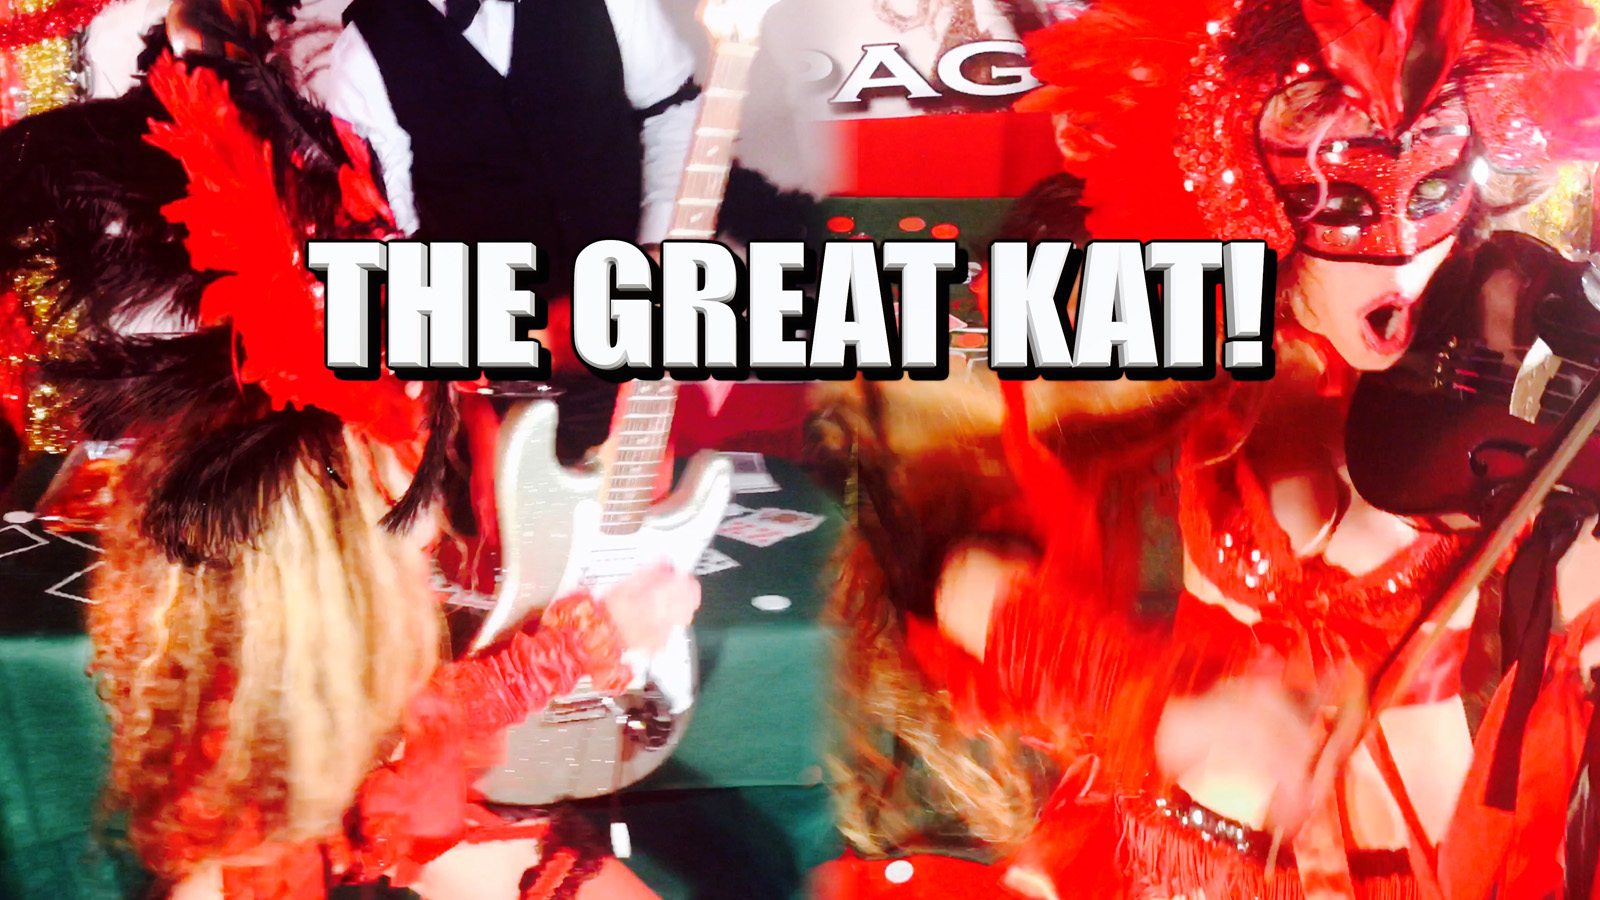 THE GREAT KAT! From CHEF GREAT KAT COOKS PAGANINI'S RAVIOLI!